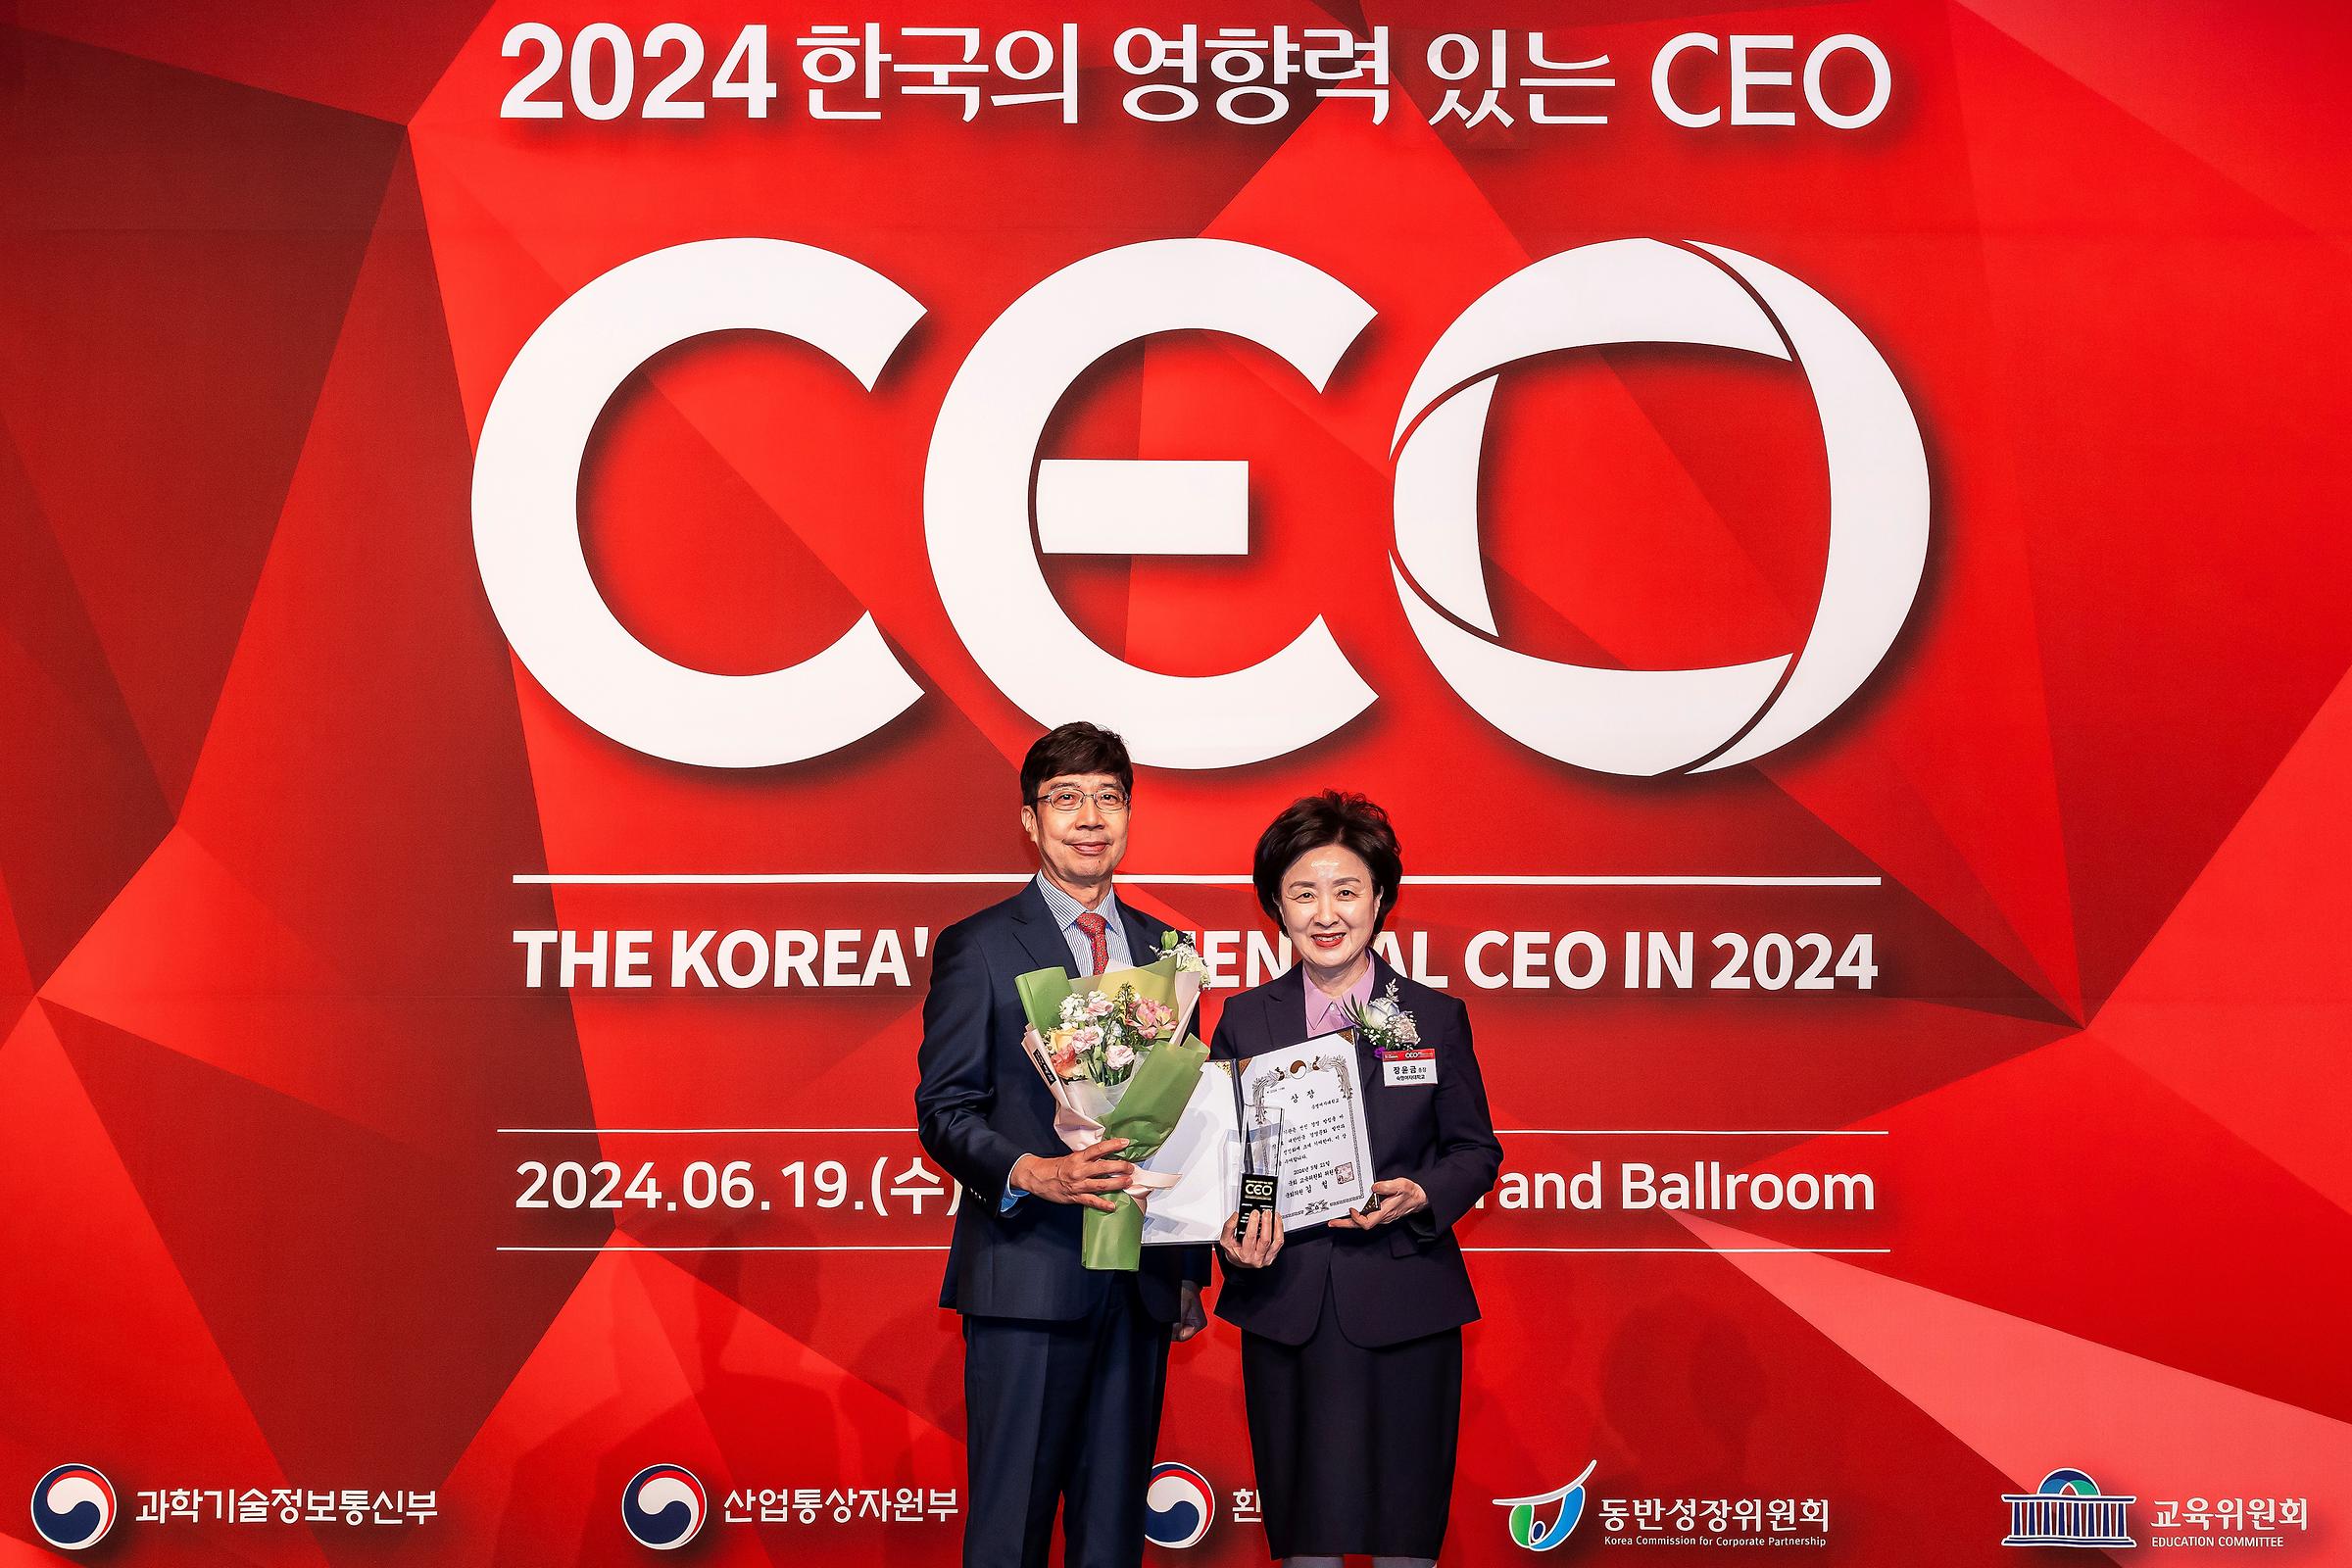 President Chang selected as Korea’s Influential CEO in 2024